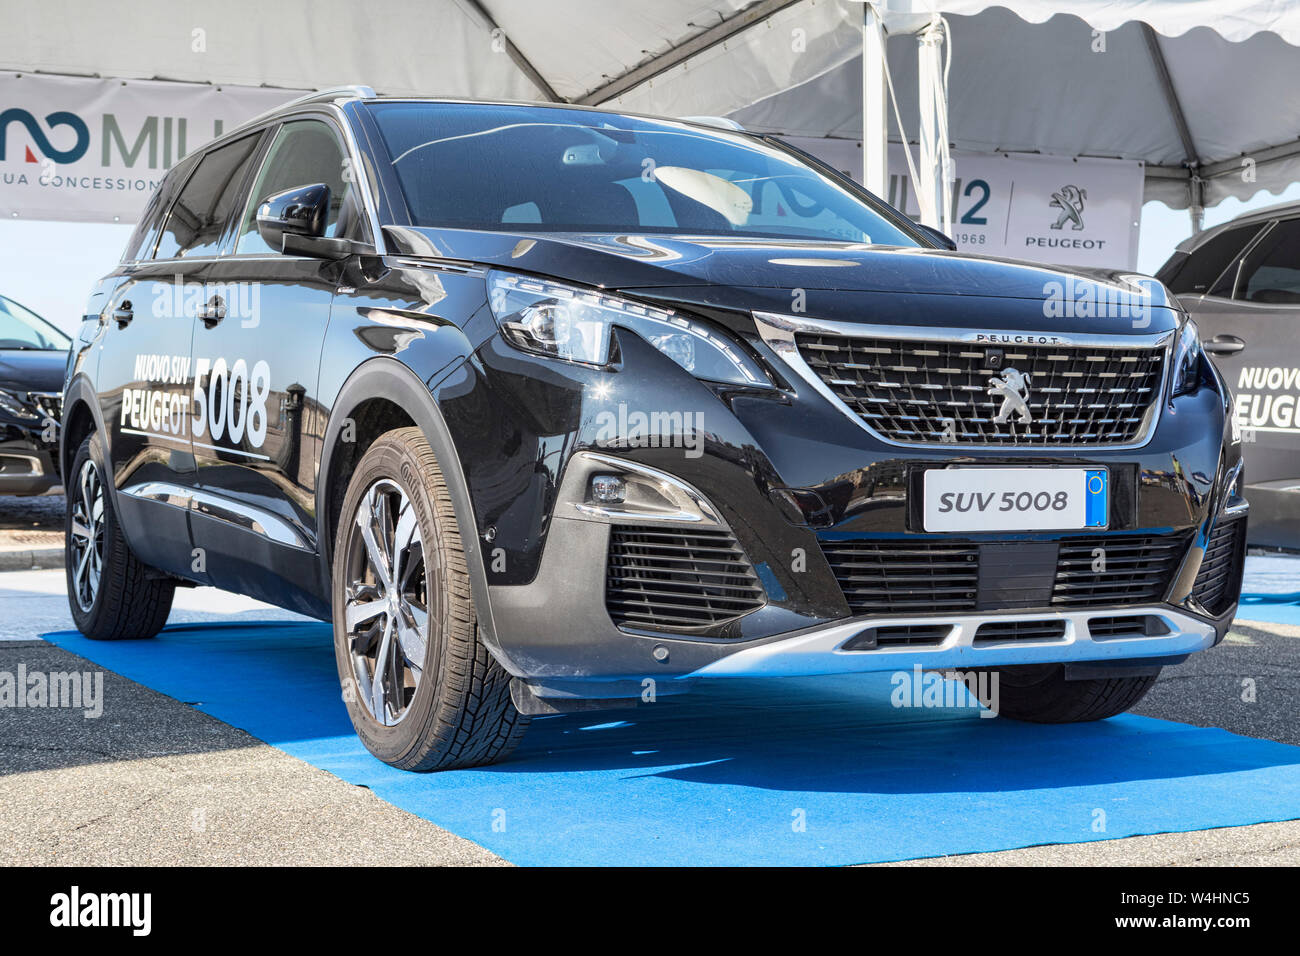 Rome,Italy - July 21, 2019:On occasion of  Rome capital city Rally event, the motor showrooms exhibit new cars models : A new SUV 5008 from Peugeot au Stock Photo